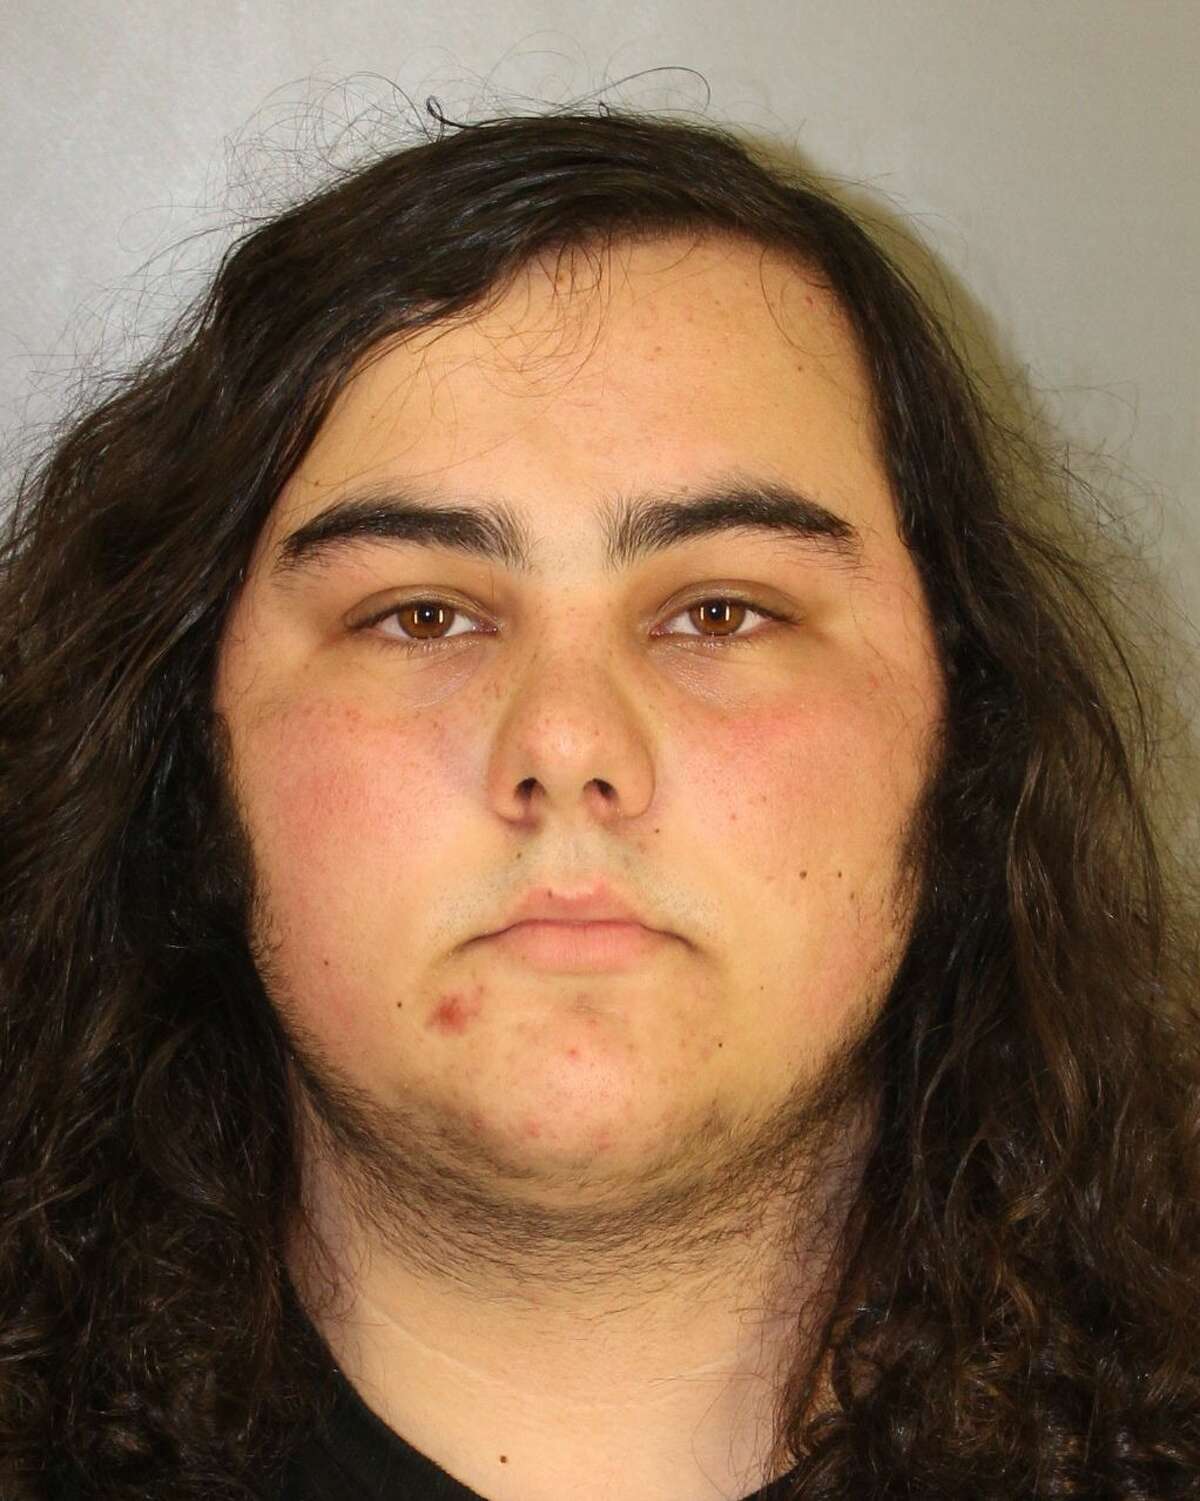 Triston Miller, 17, was arrested Wednesday for allegedly making a terroristic threat to PN-G High School.